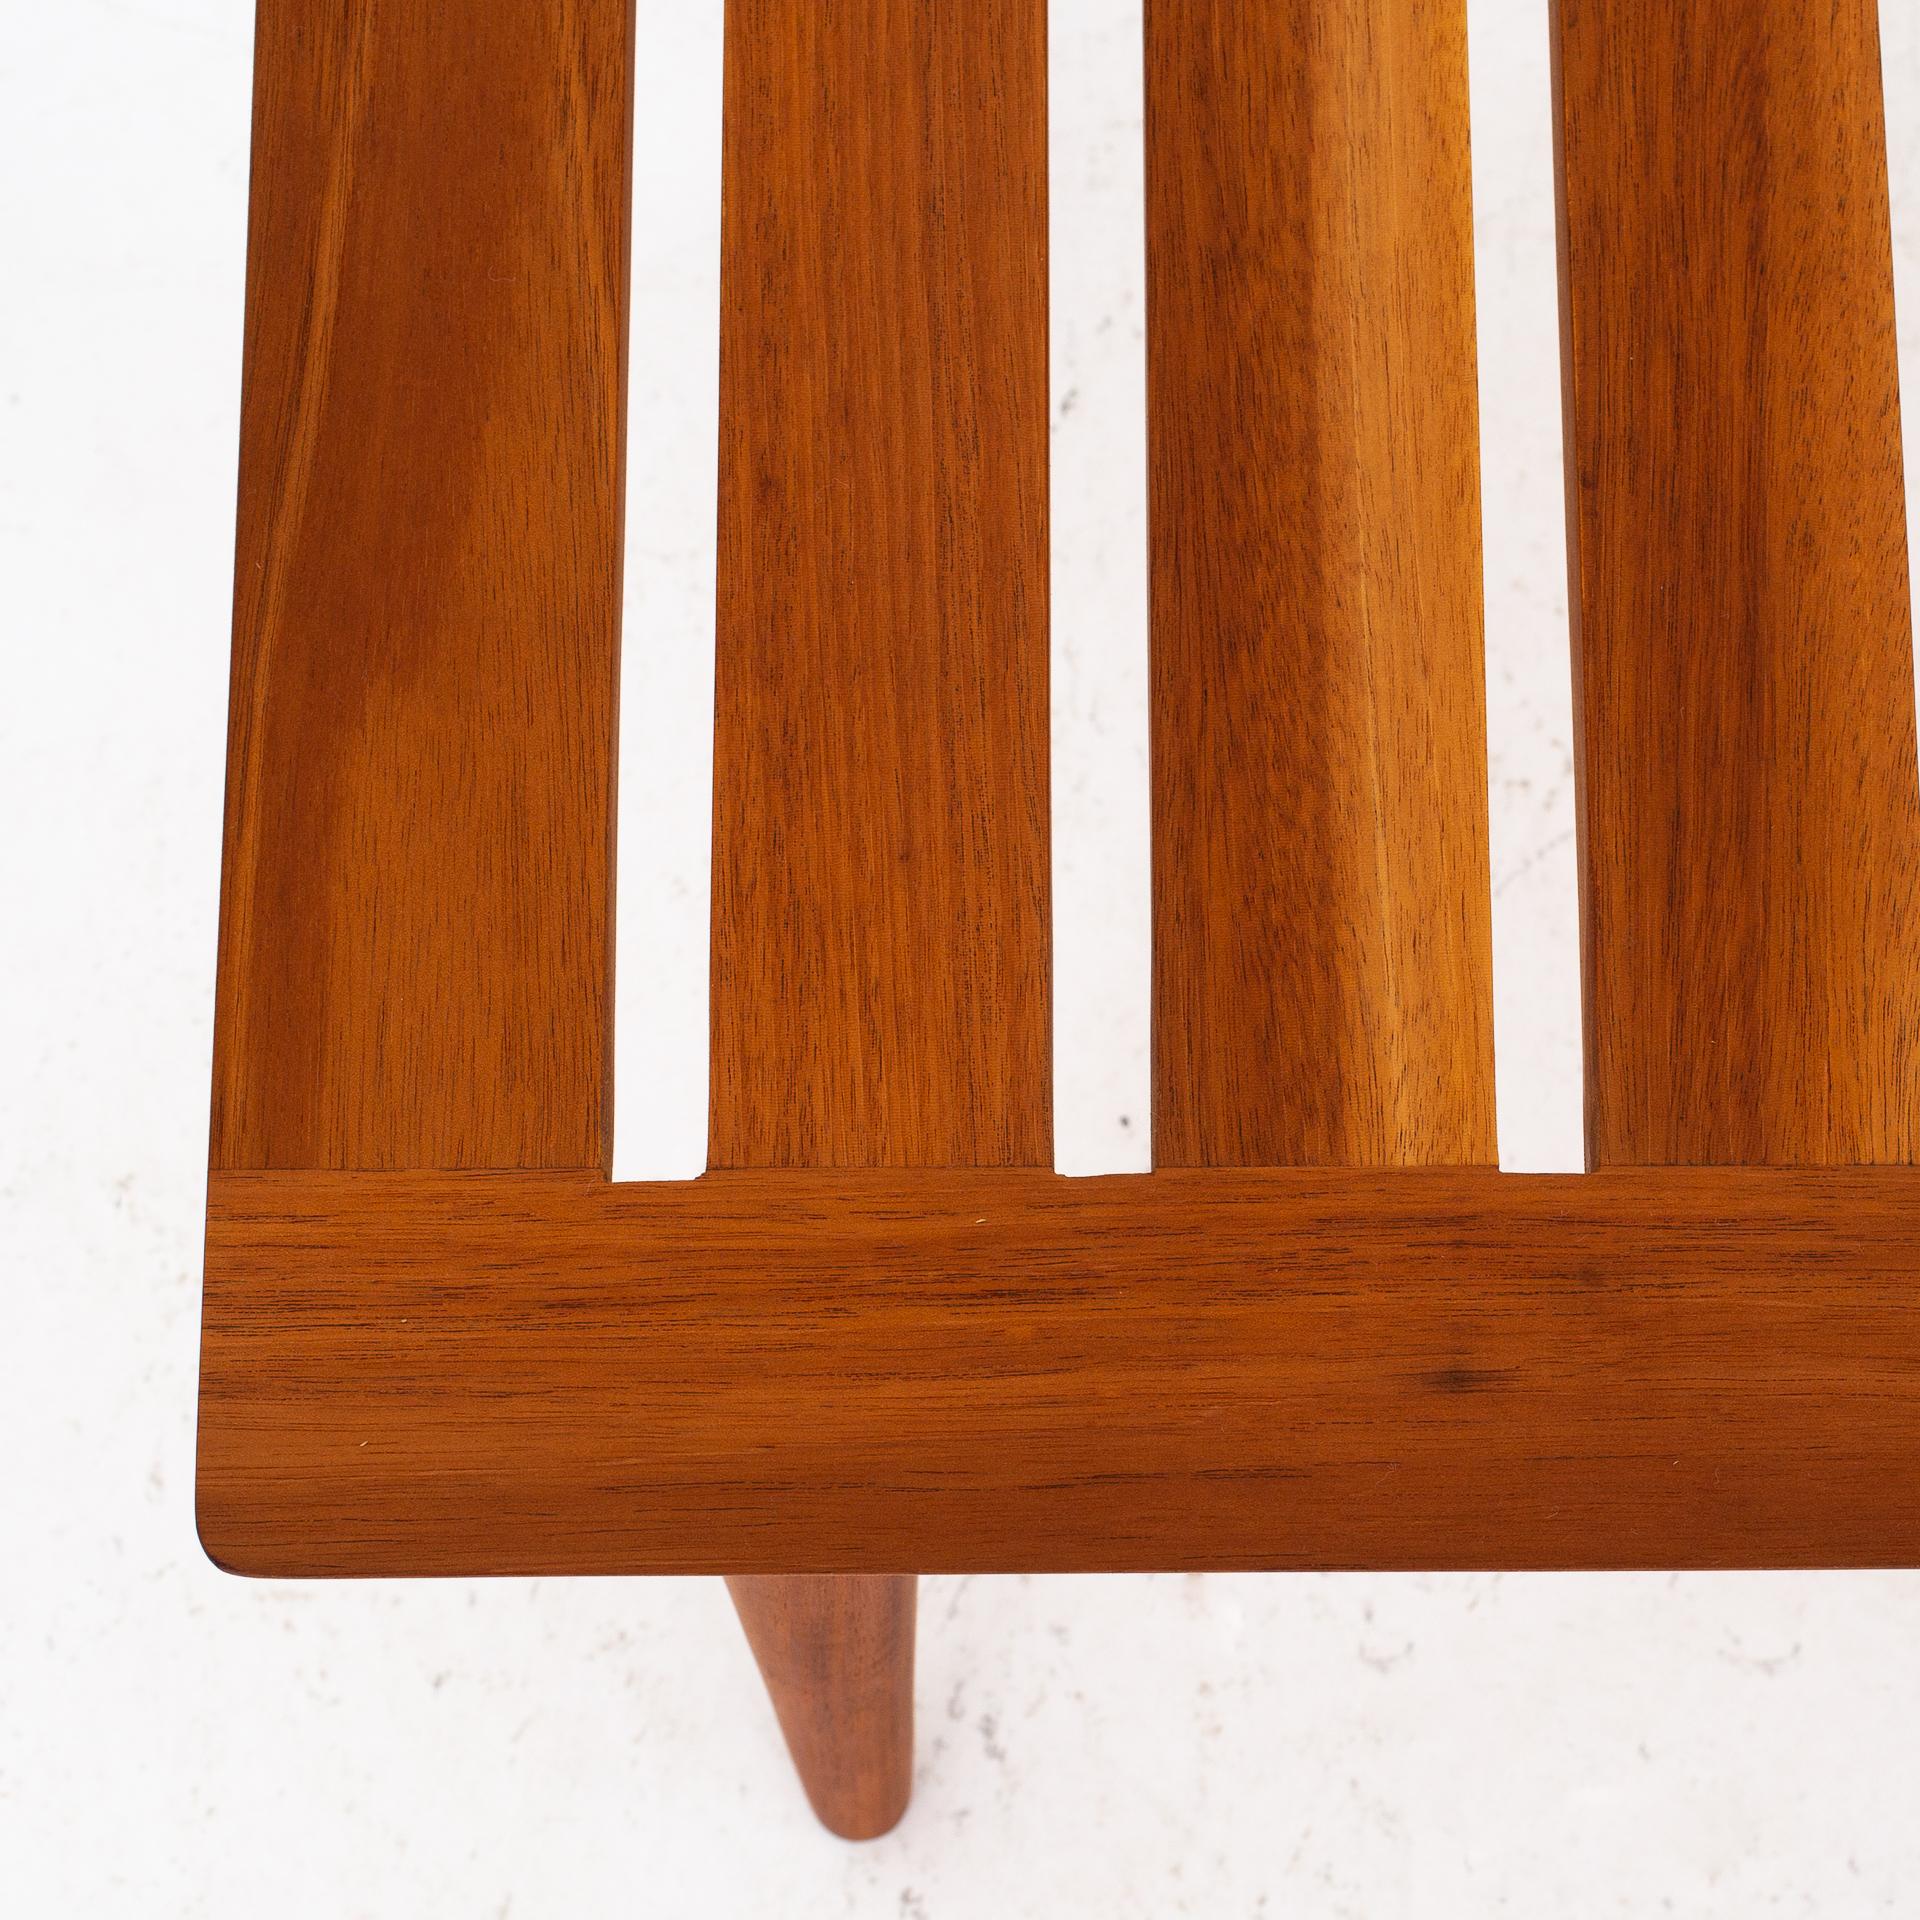 111A - Bench in solid mahogany, designed in 1959. Maker P. Jeppesen.